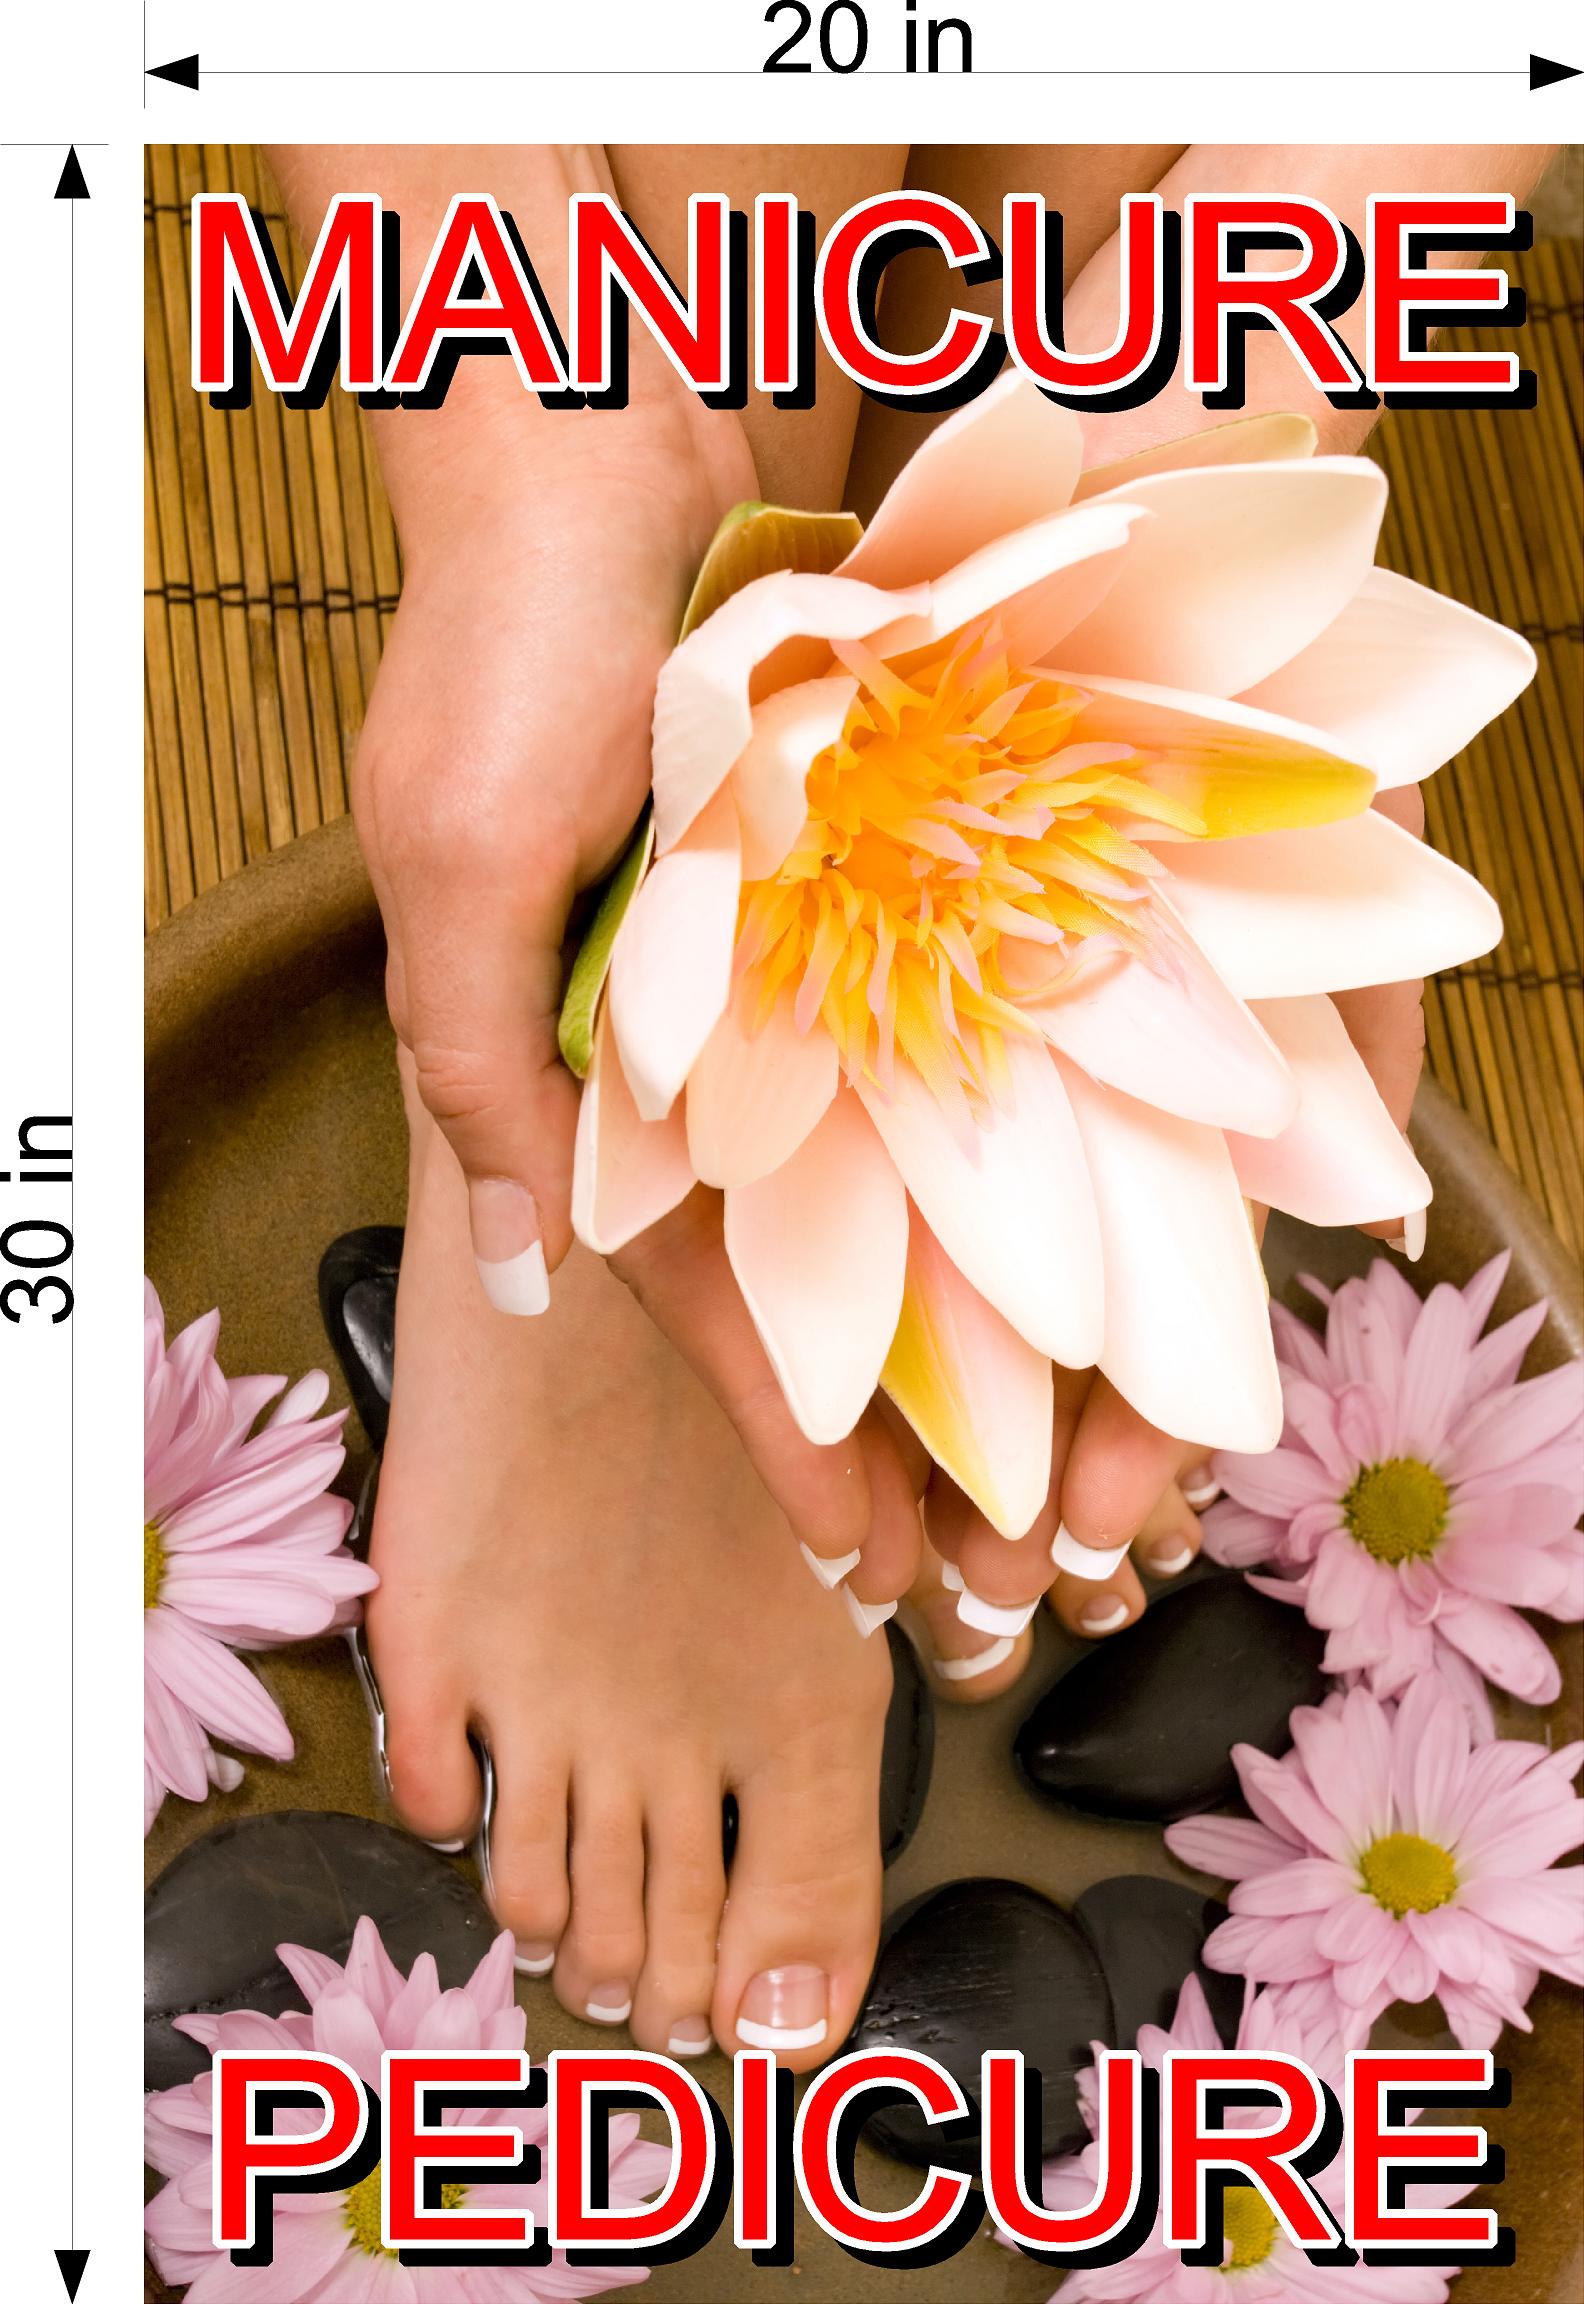 Pedicure & Manicure 17 Wallpaper Poster Decal with Adhesive Backing Wall Sticker Decor Indoors Interior Sign Vertical